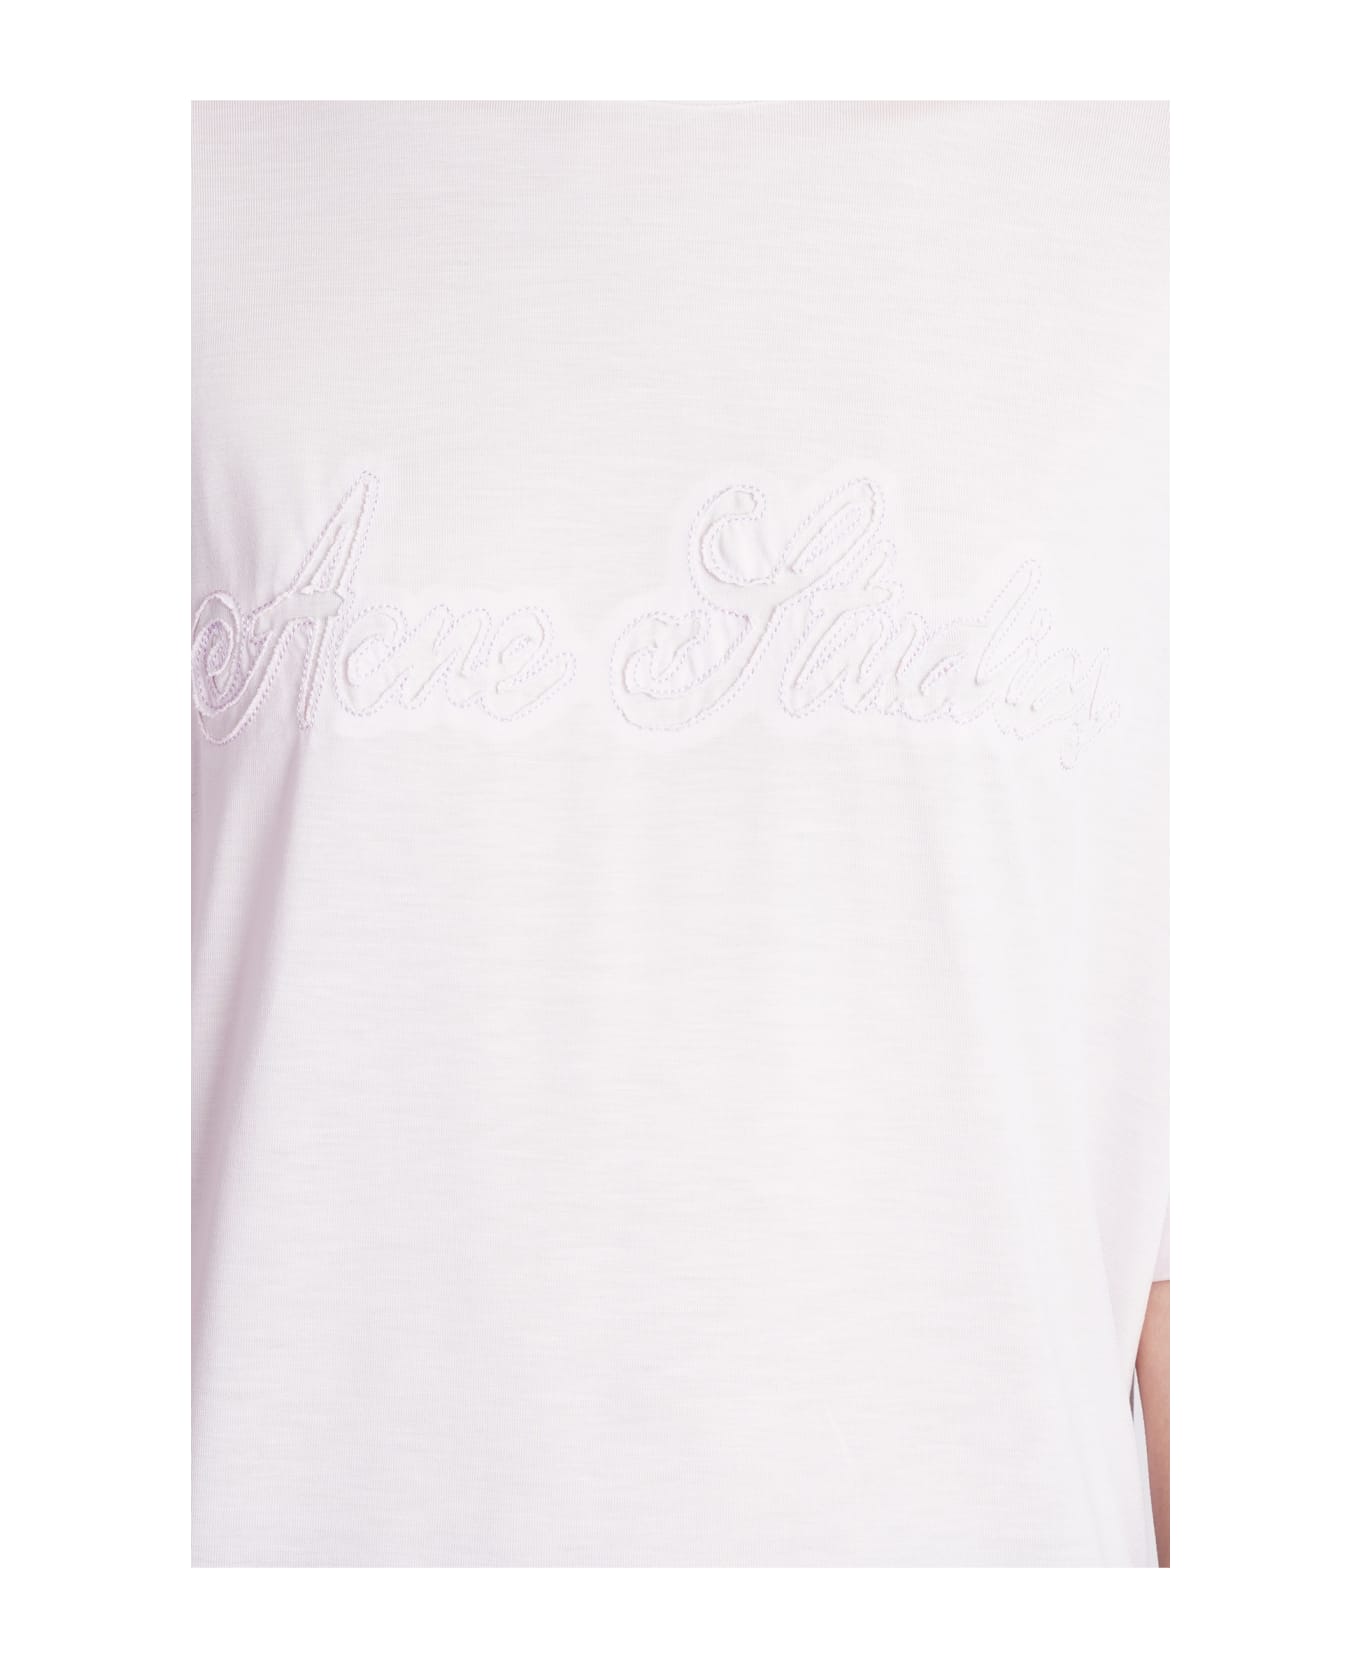 Acne Studios T-shirt In Rose-pink Wool And Polyester - LIGHT PURPLE